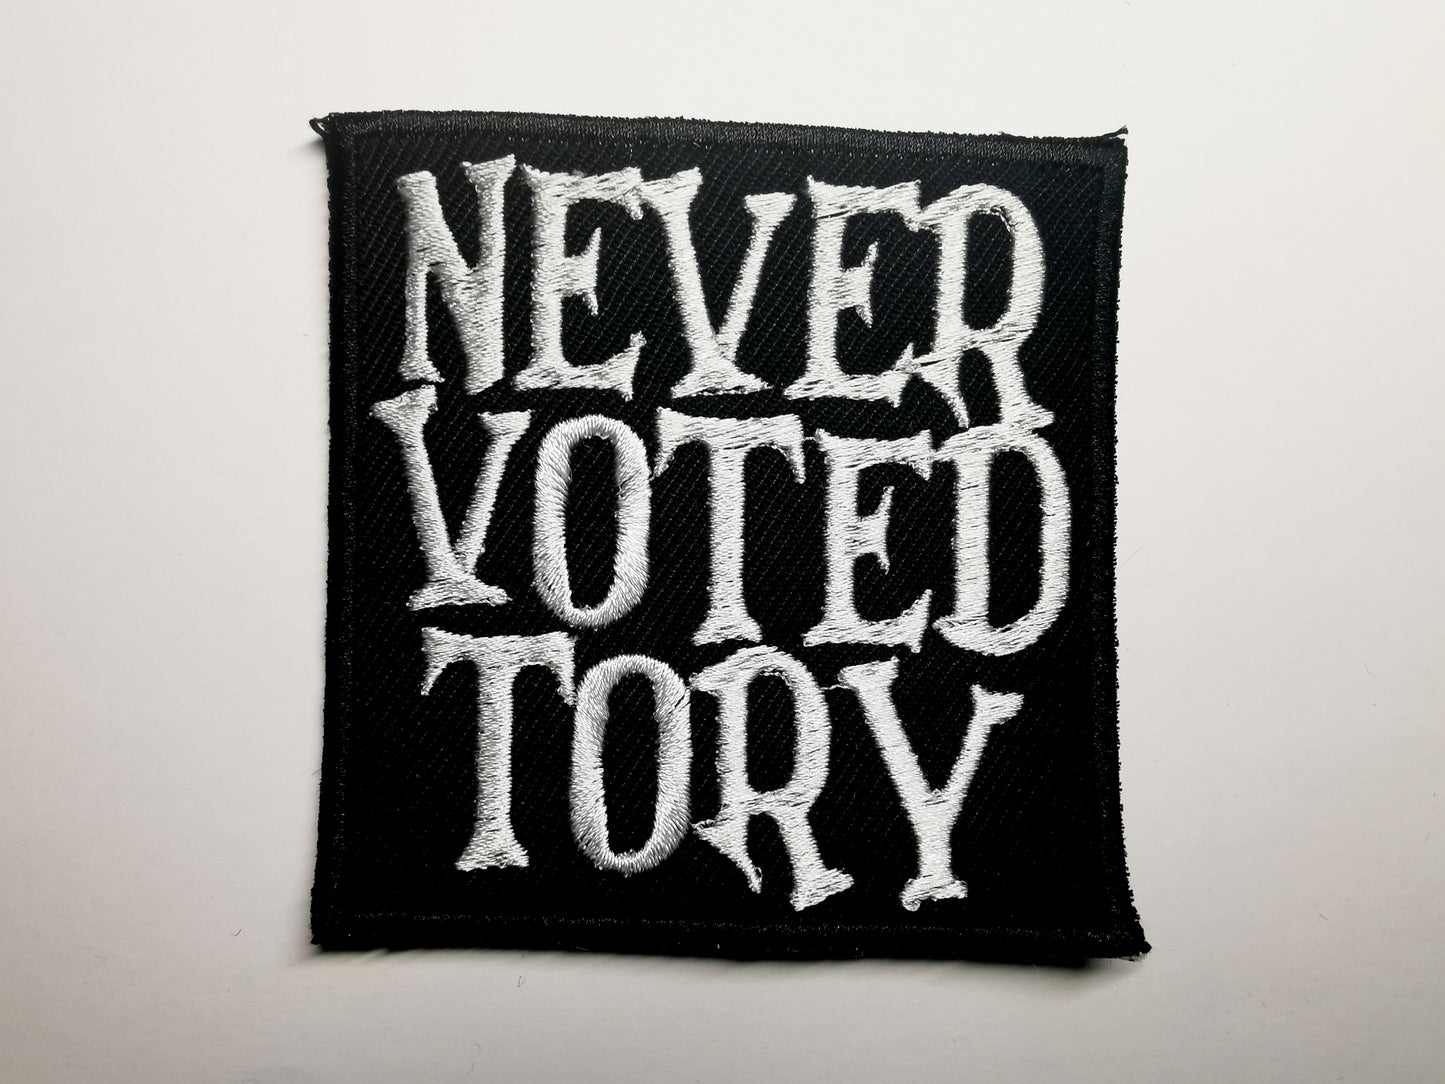 Never Voted Tory Embroidered Patch